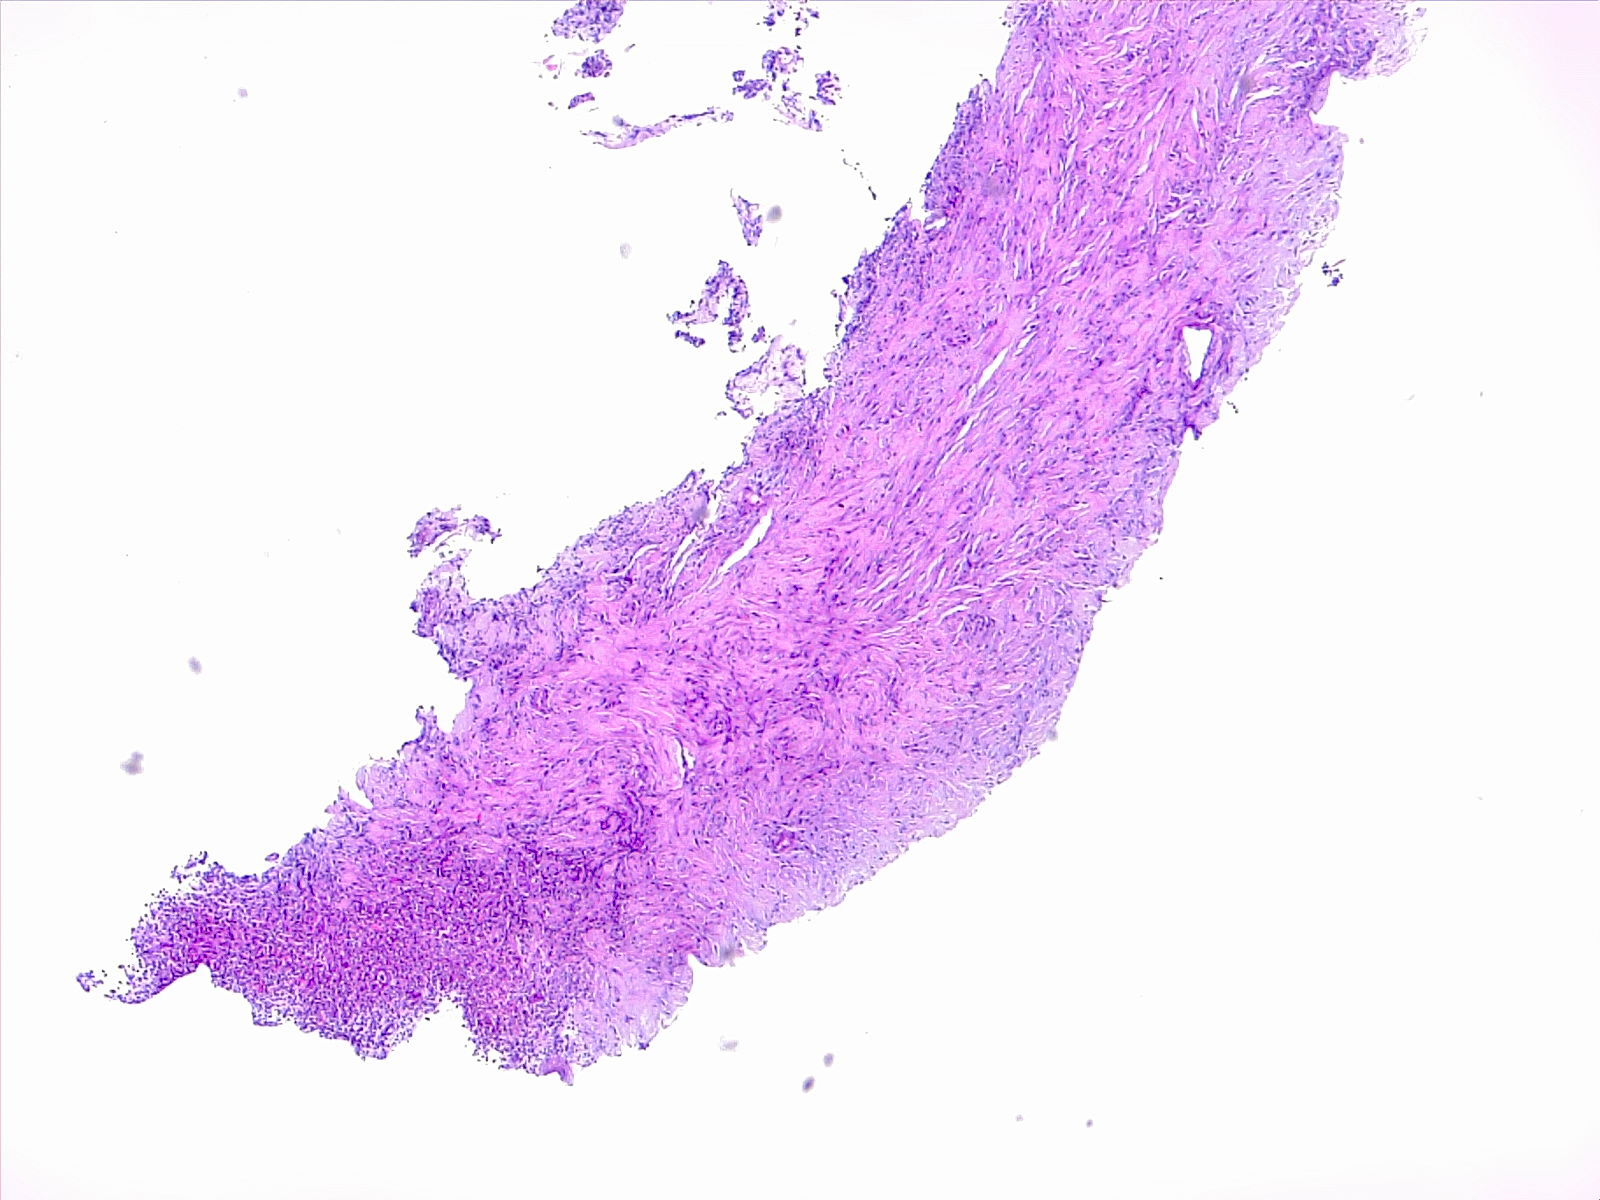 Lung pneumonia with fibrosis